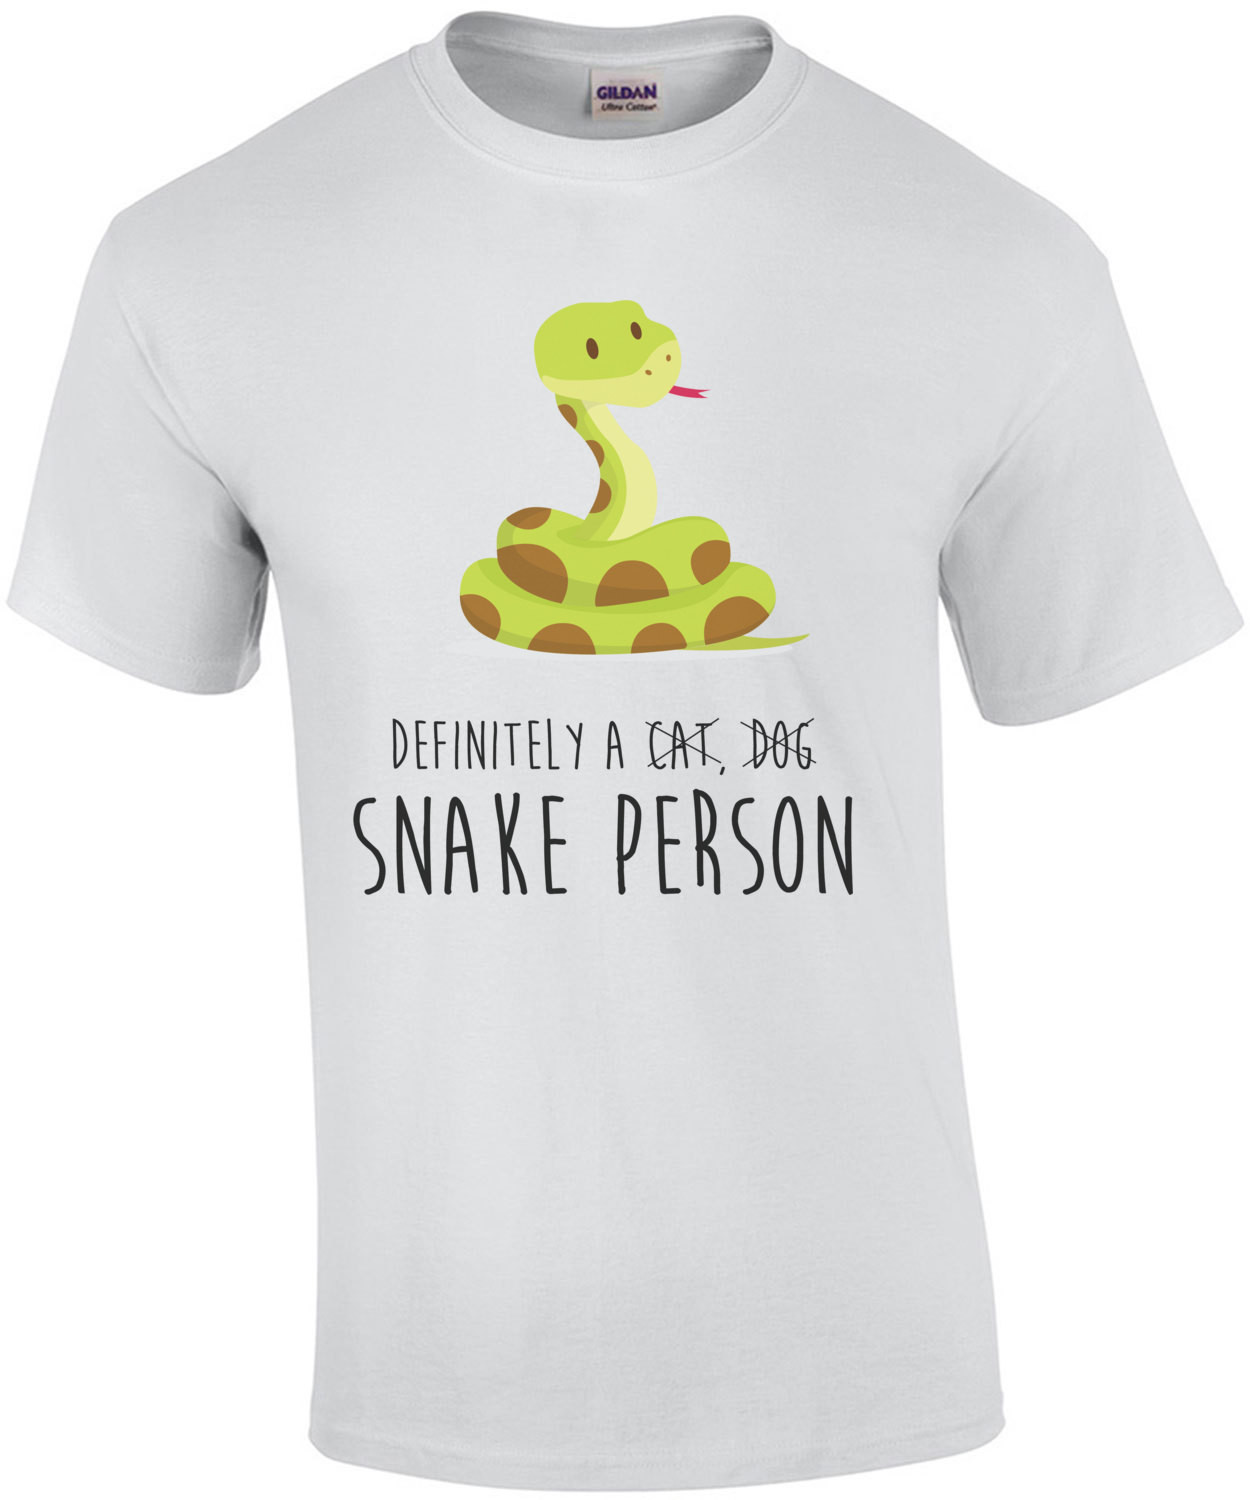 Definitely a snake person - funny snake t-shirt